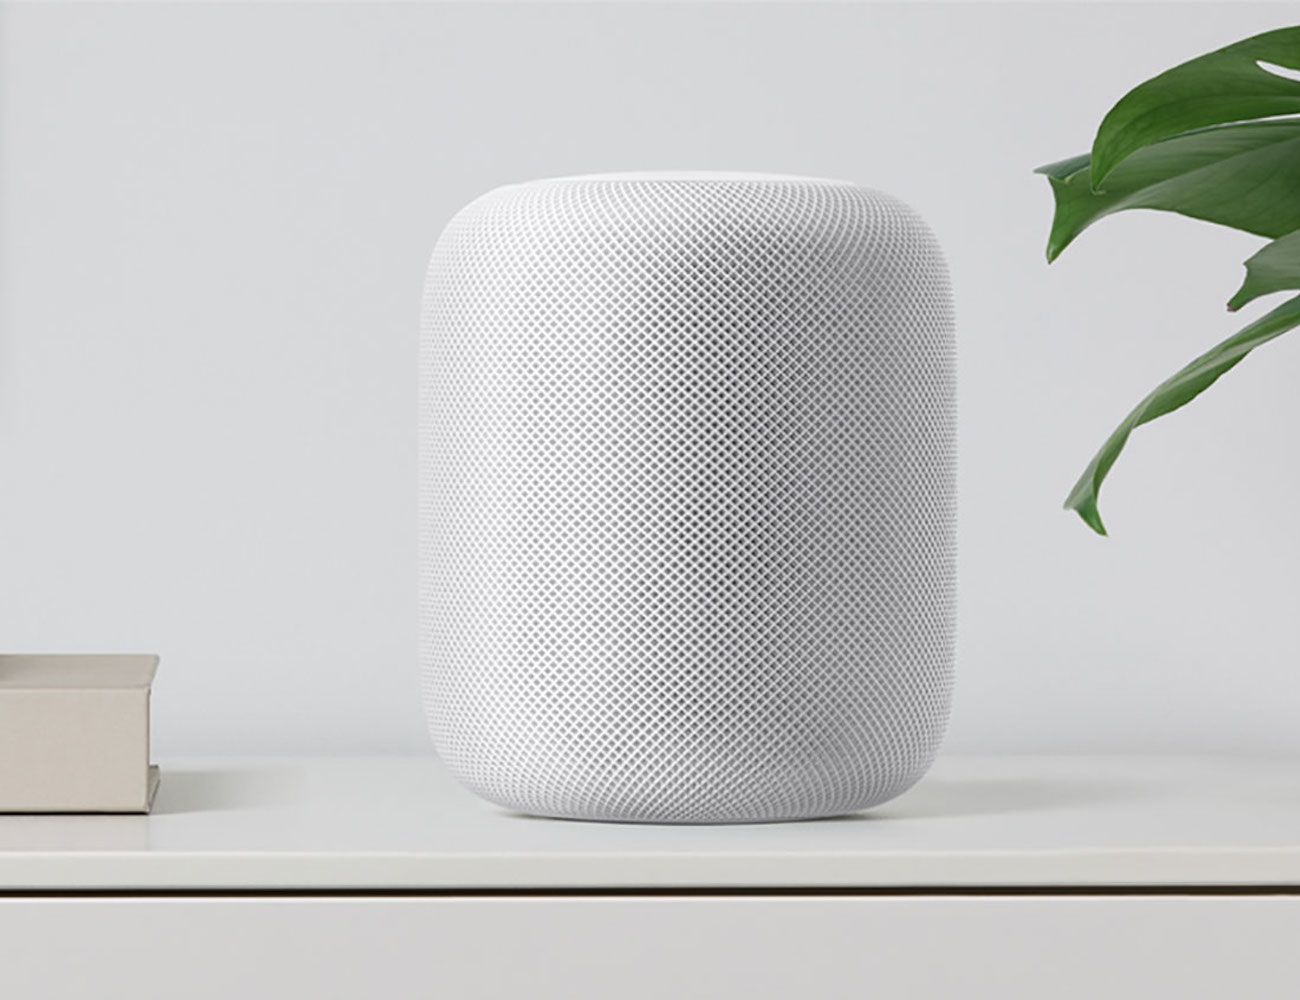 Apple HomePod Smart Adaptable Speaker adjusts depending on its location to deliver high-quality sound